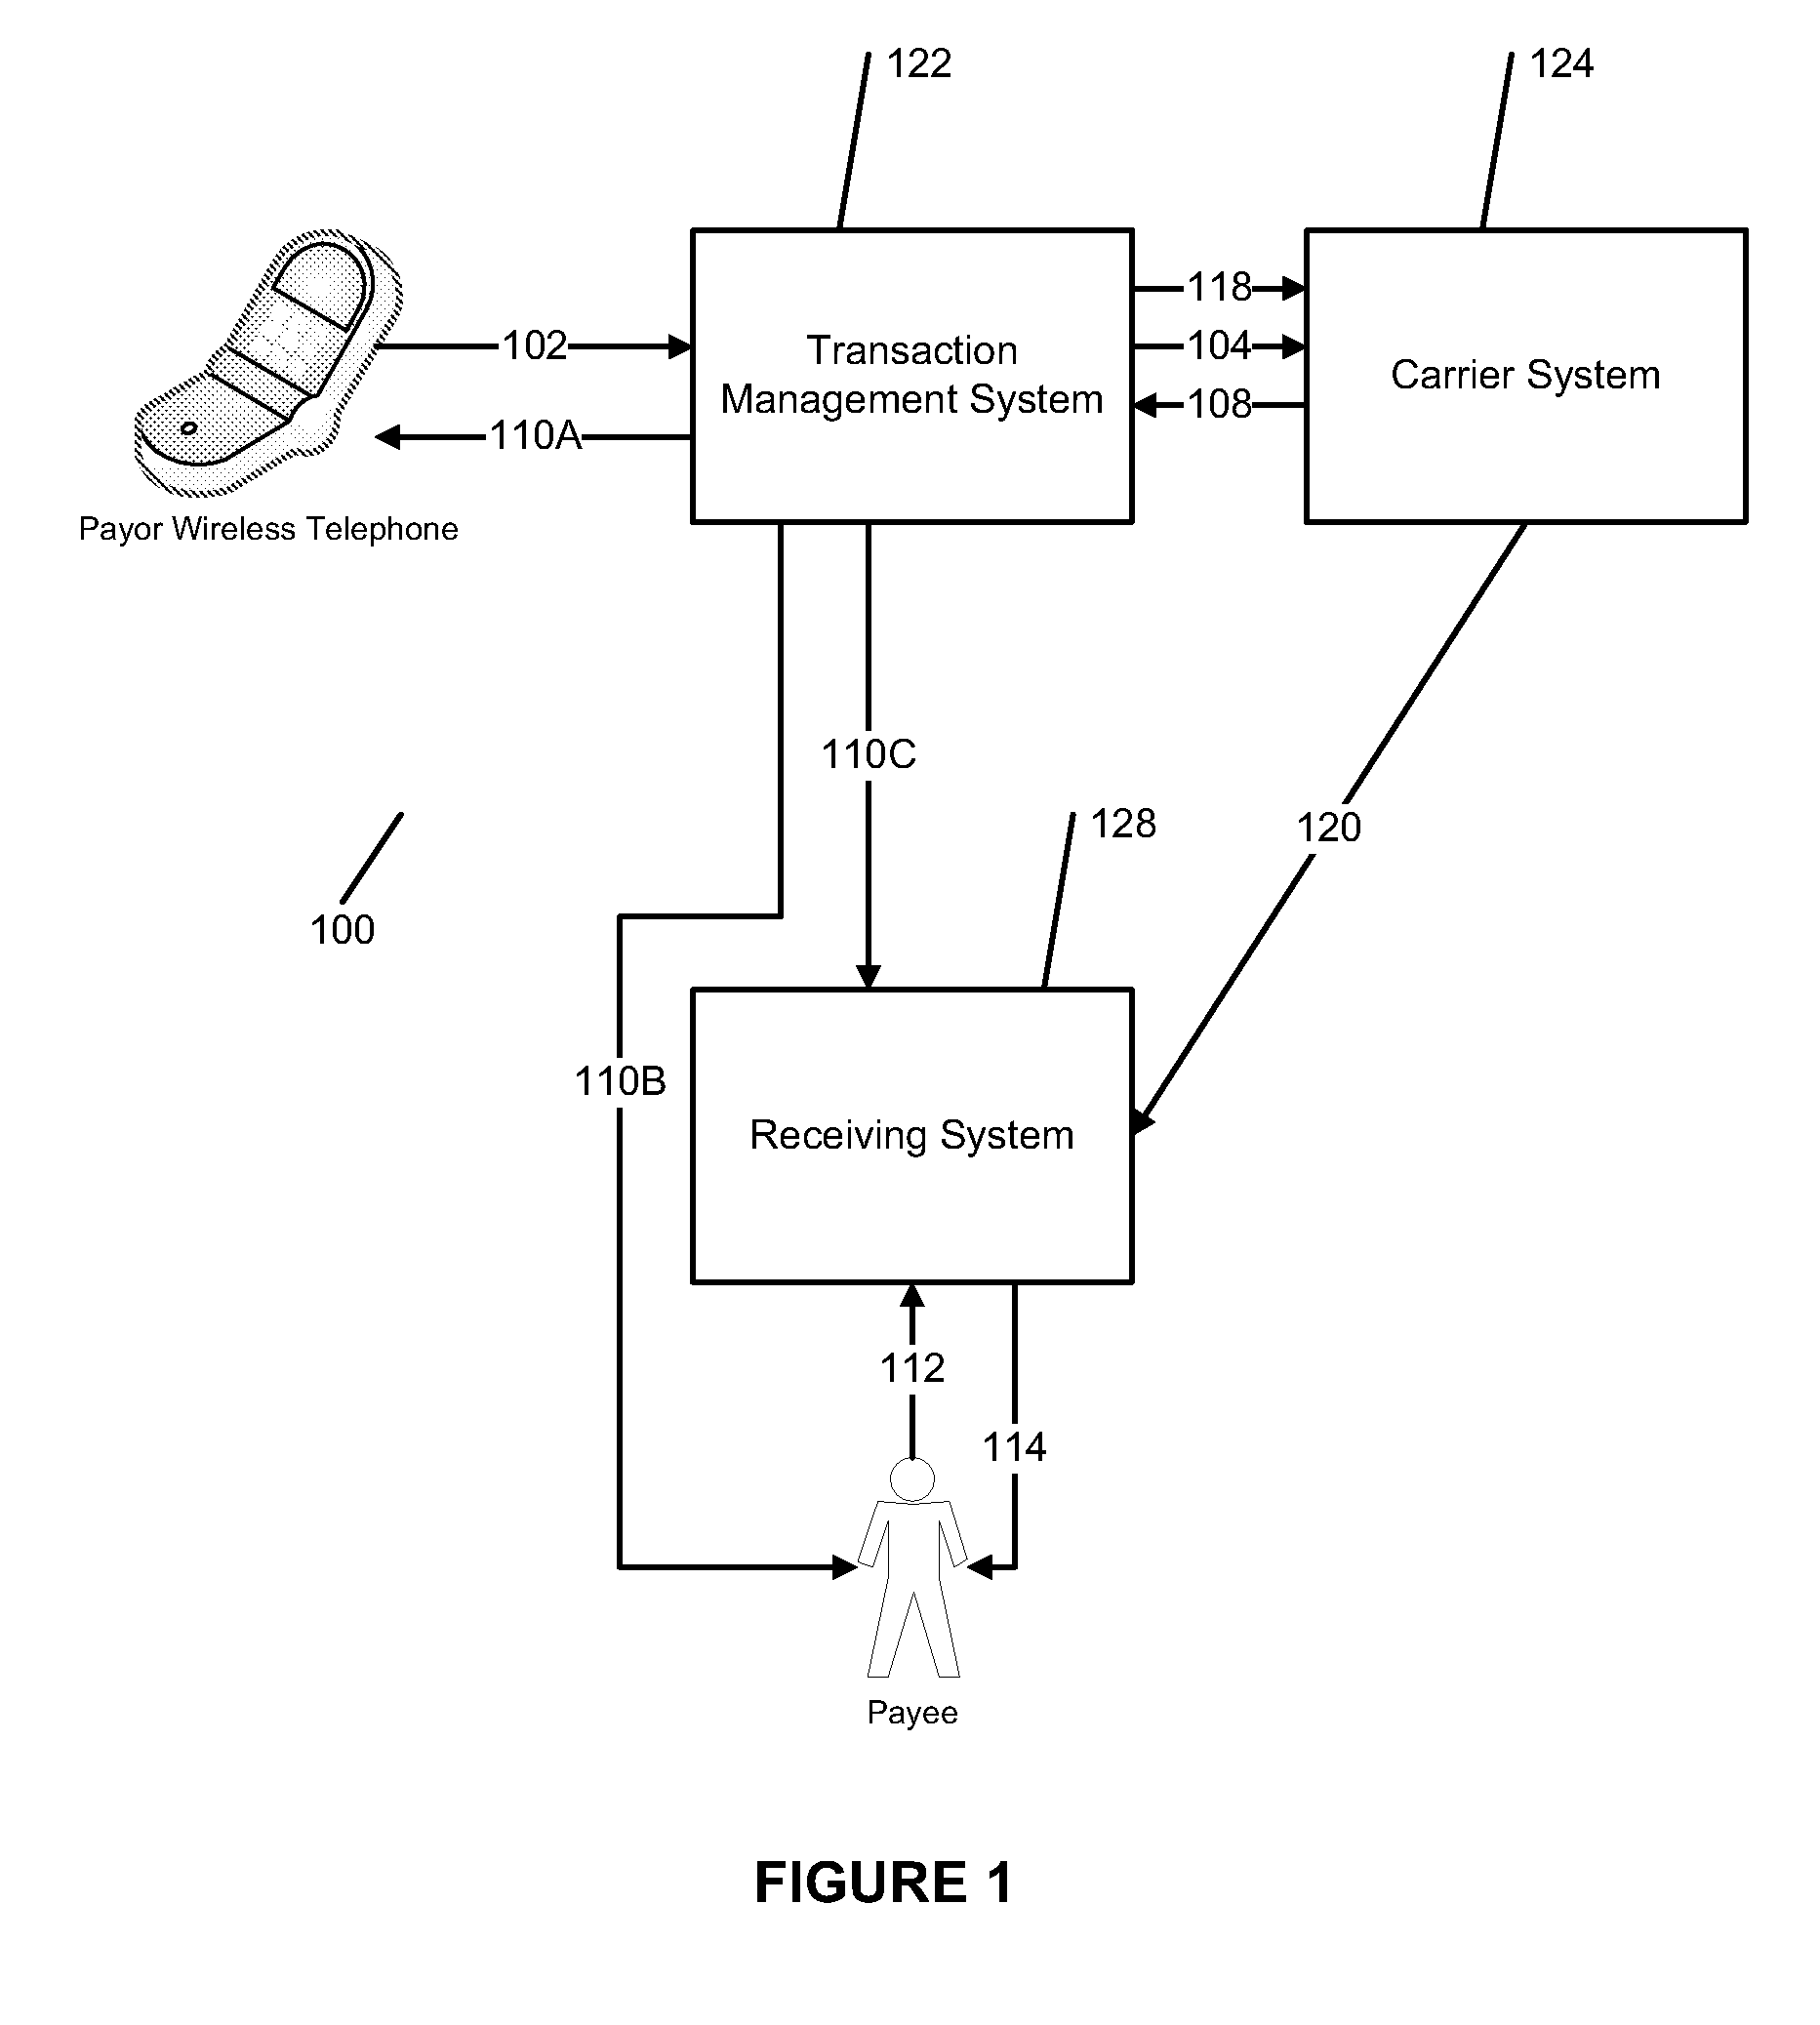 Systems and methods for transferring funds from a sending account